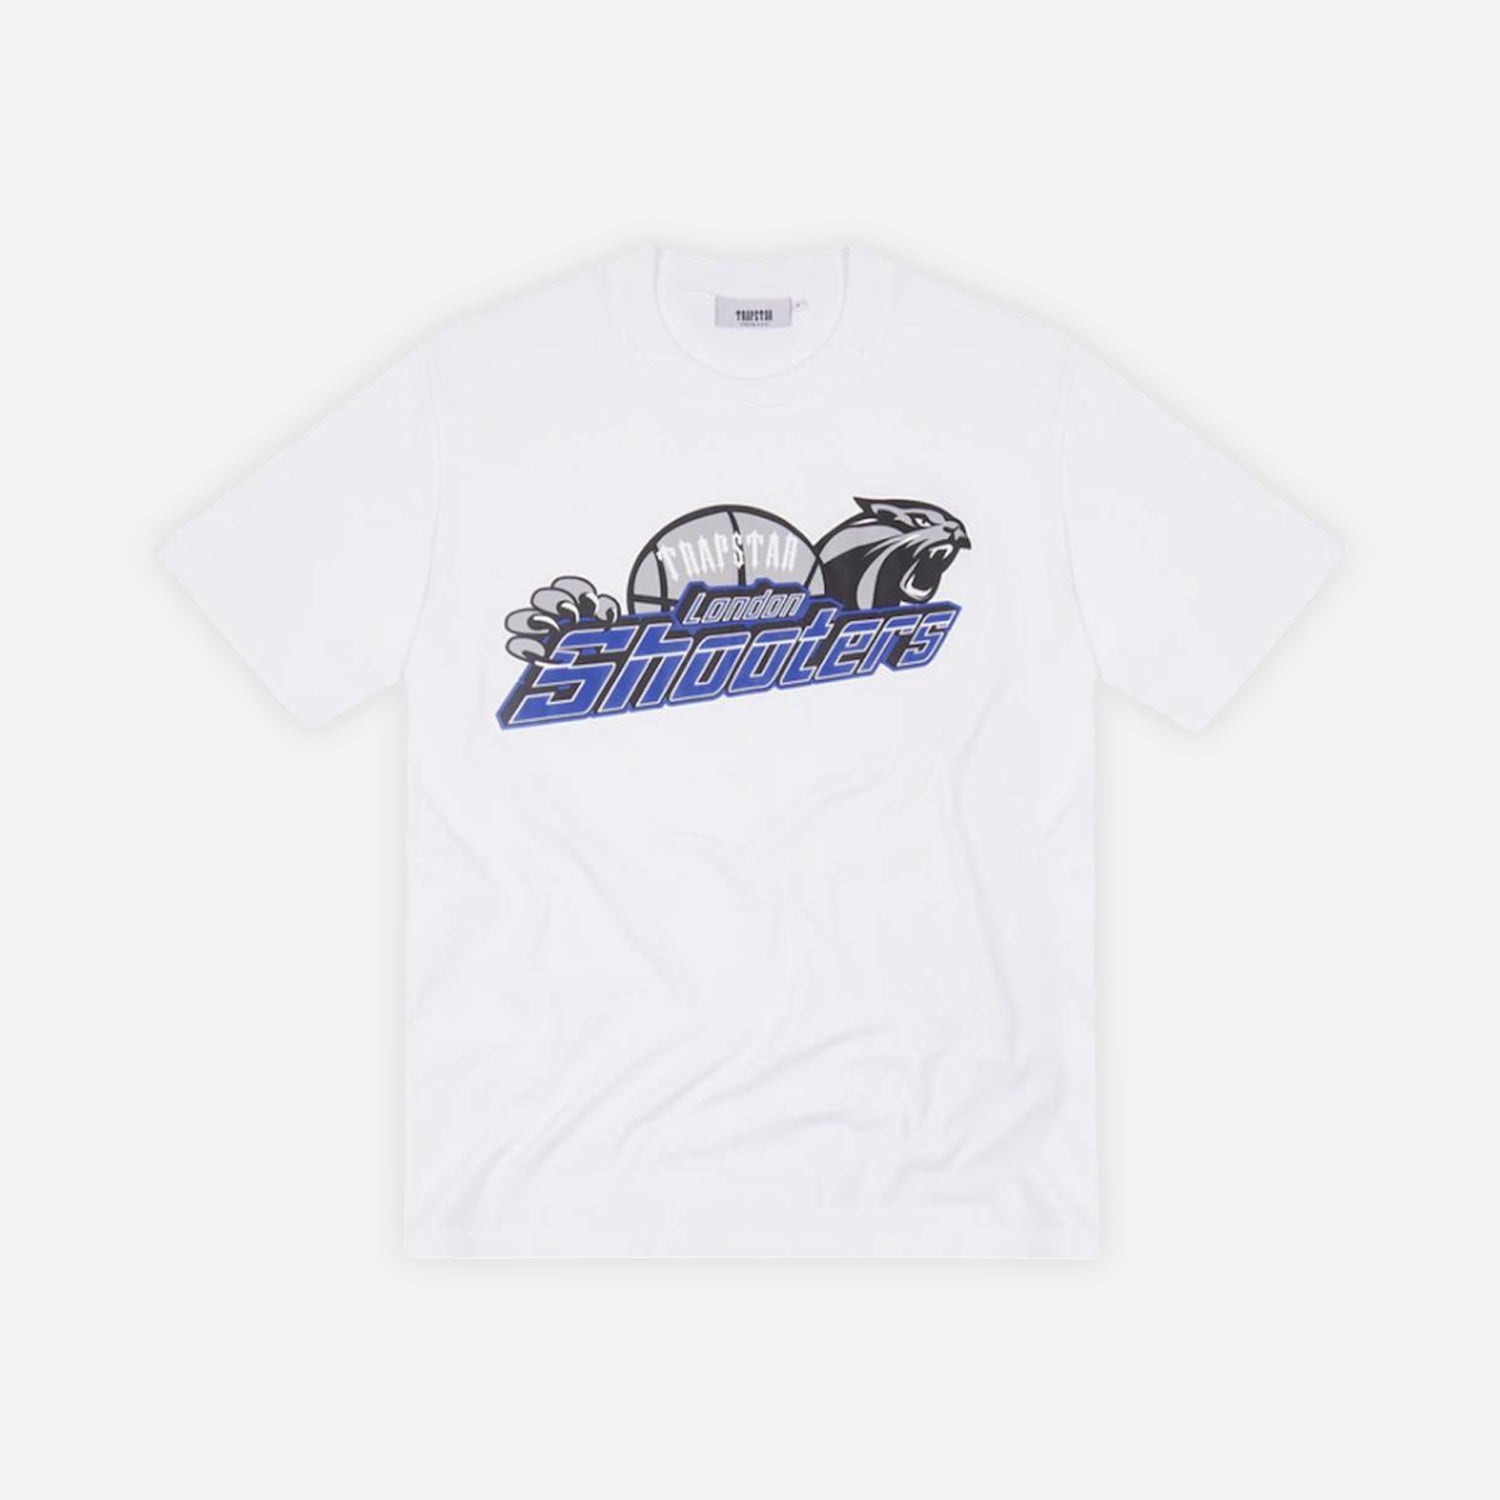 Trapstar Shooters T-Shirt - White / Blue